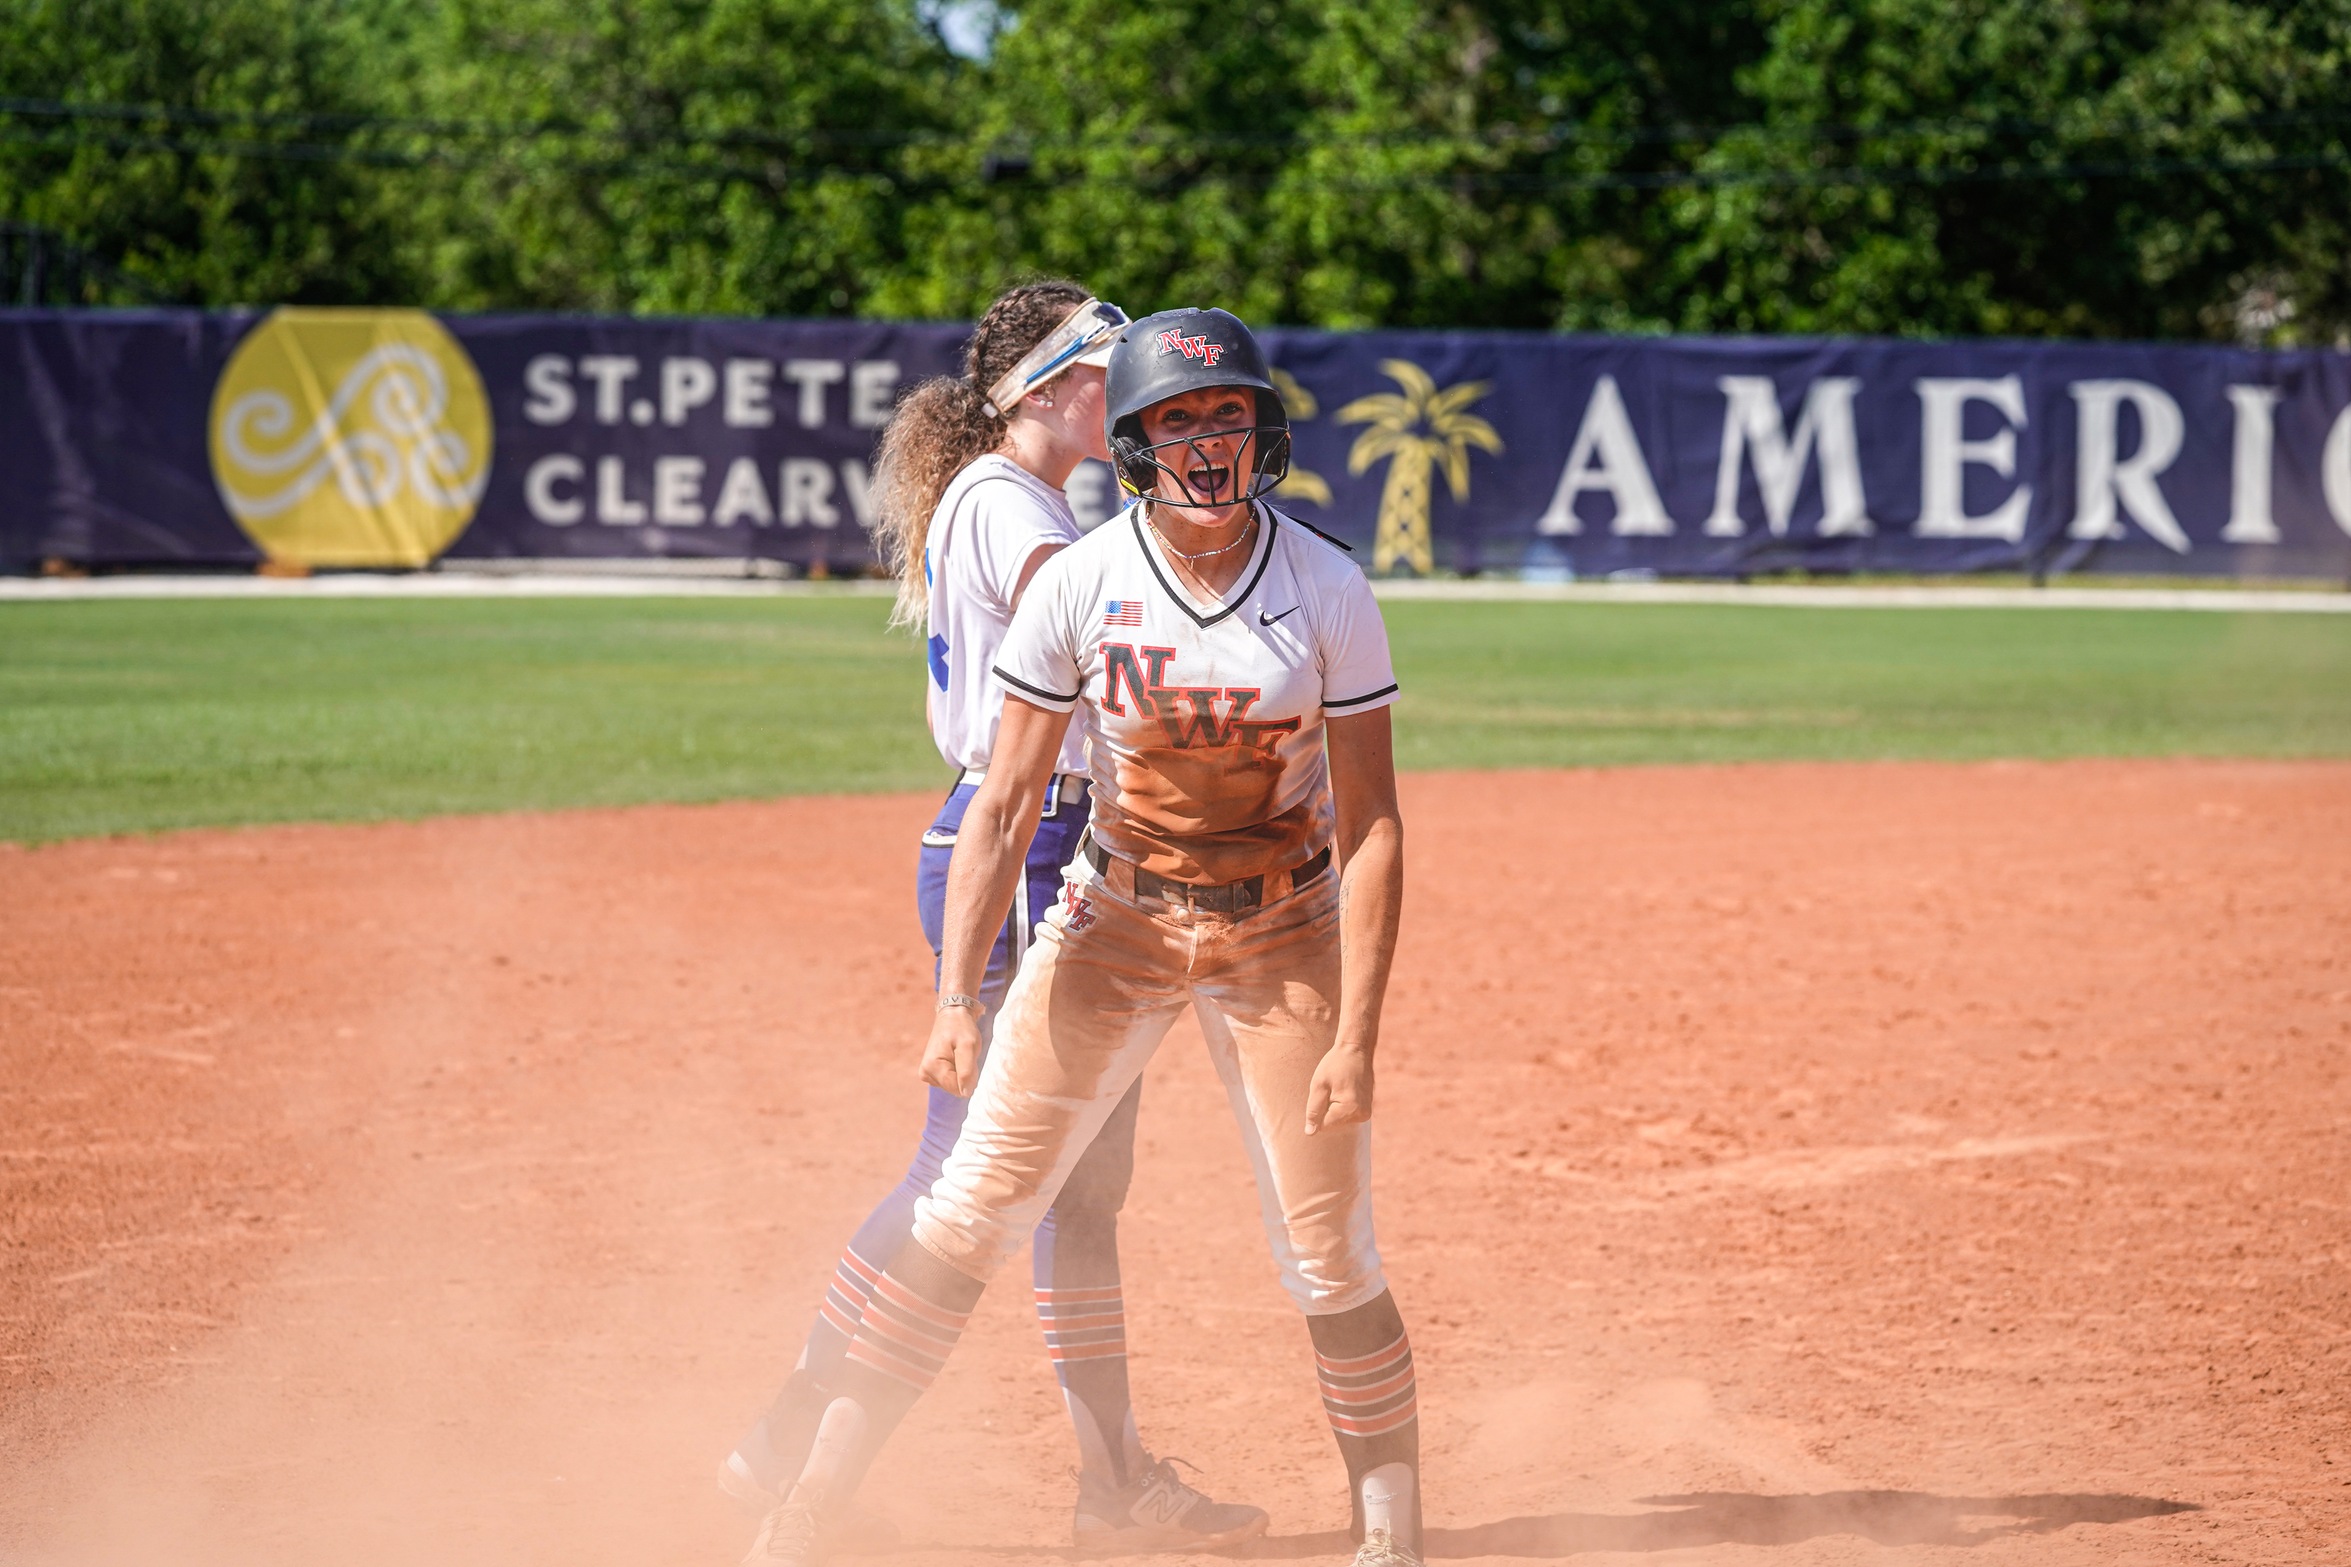 Raiders Advance to FCSAA/Region VIII Championship Game After Defeating Central Florida 10-6